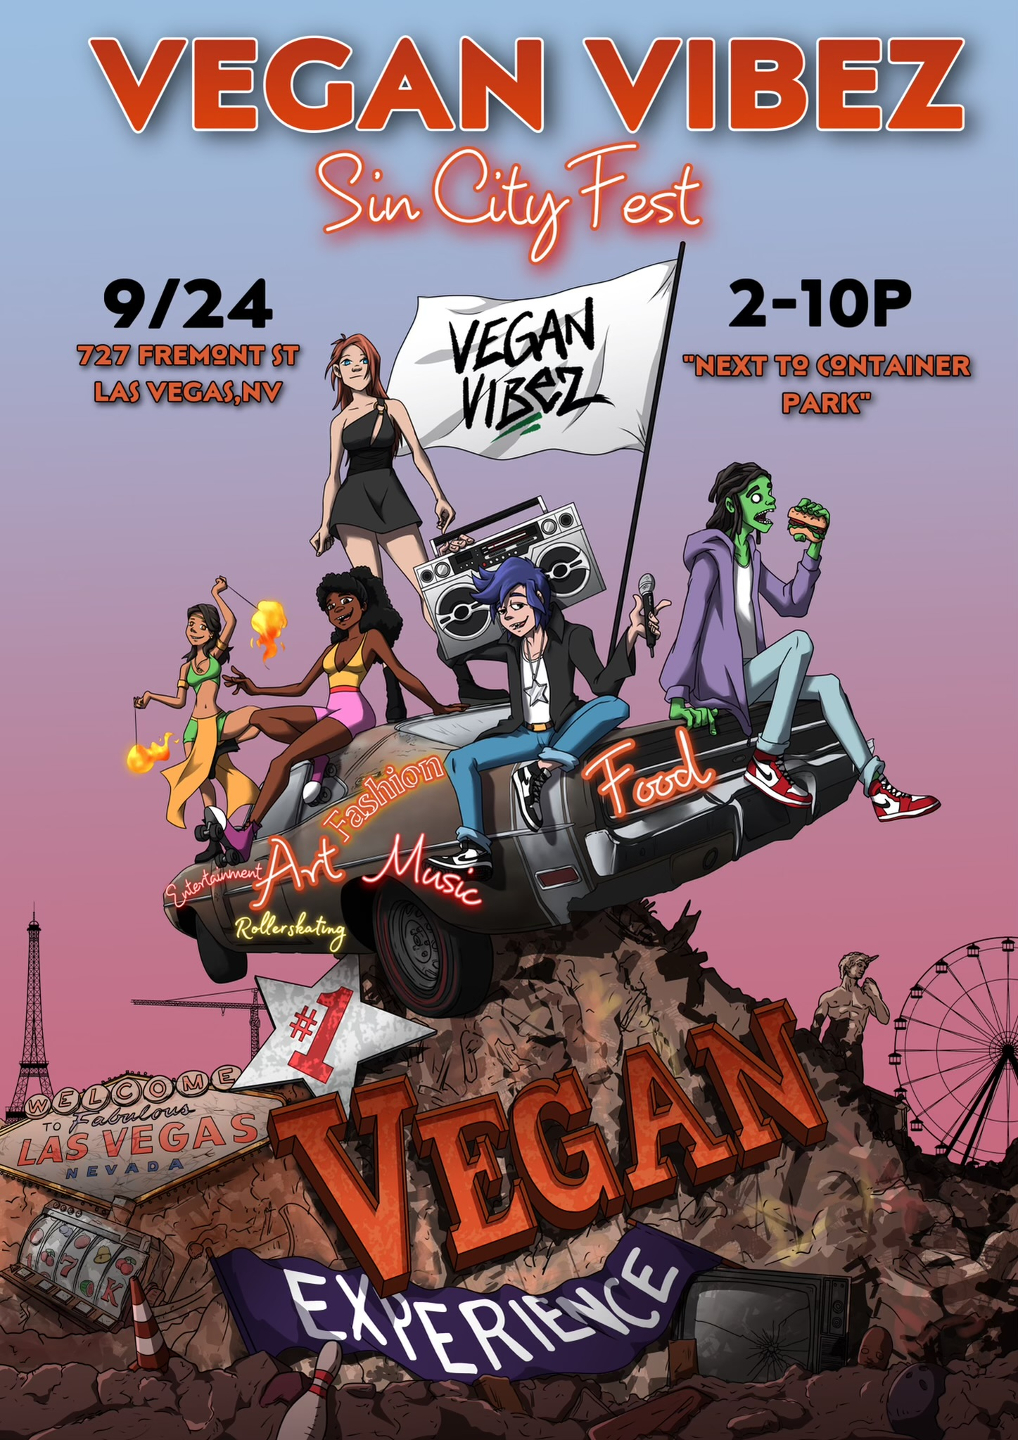 Vegan Vibez Festival Launches Tour With First Stop in Las Vegas